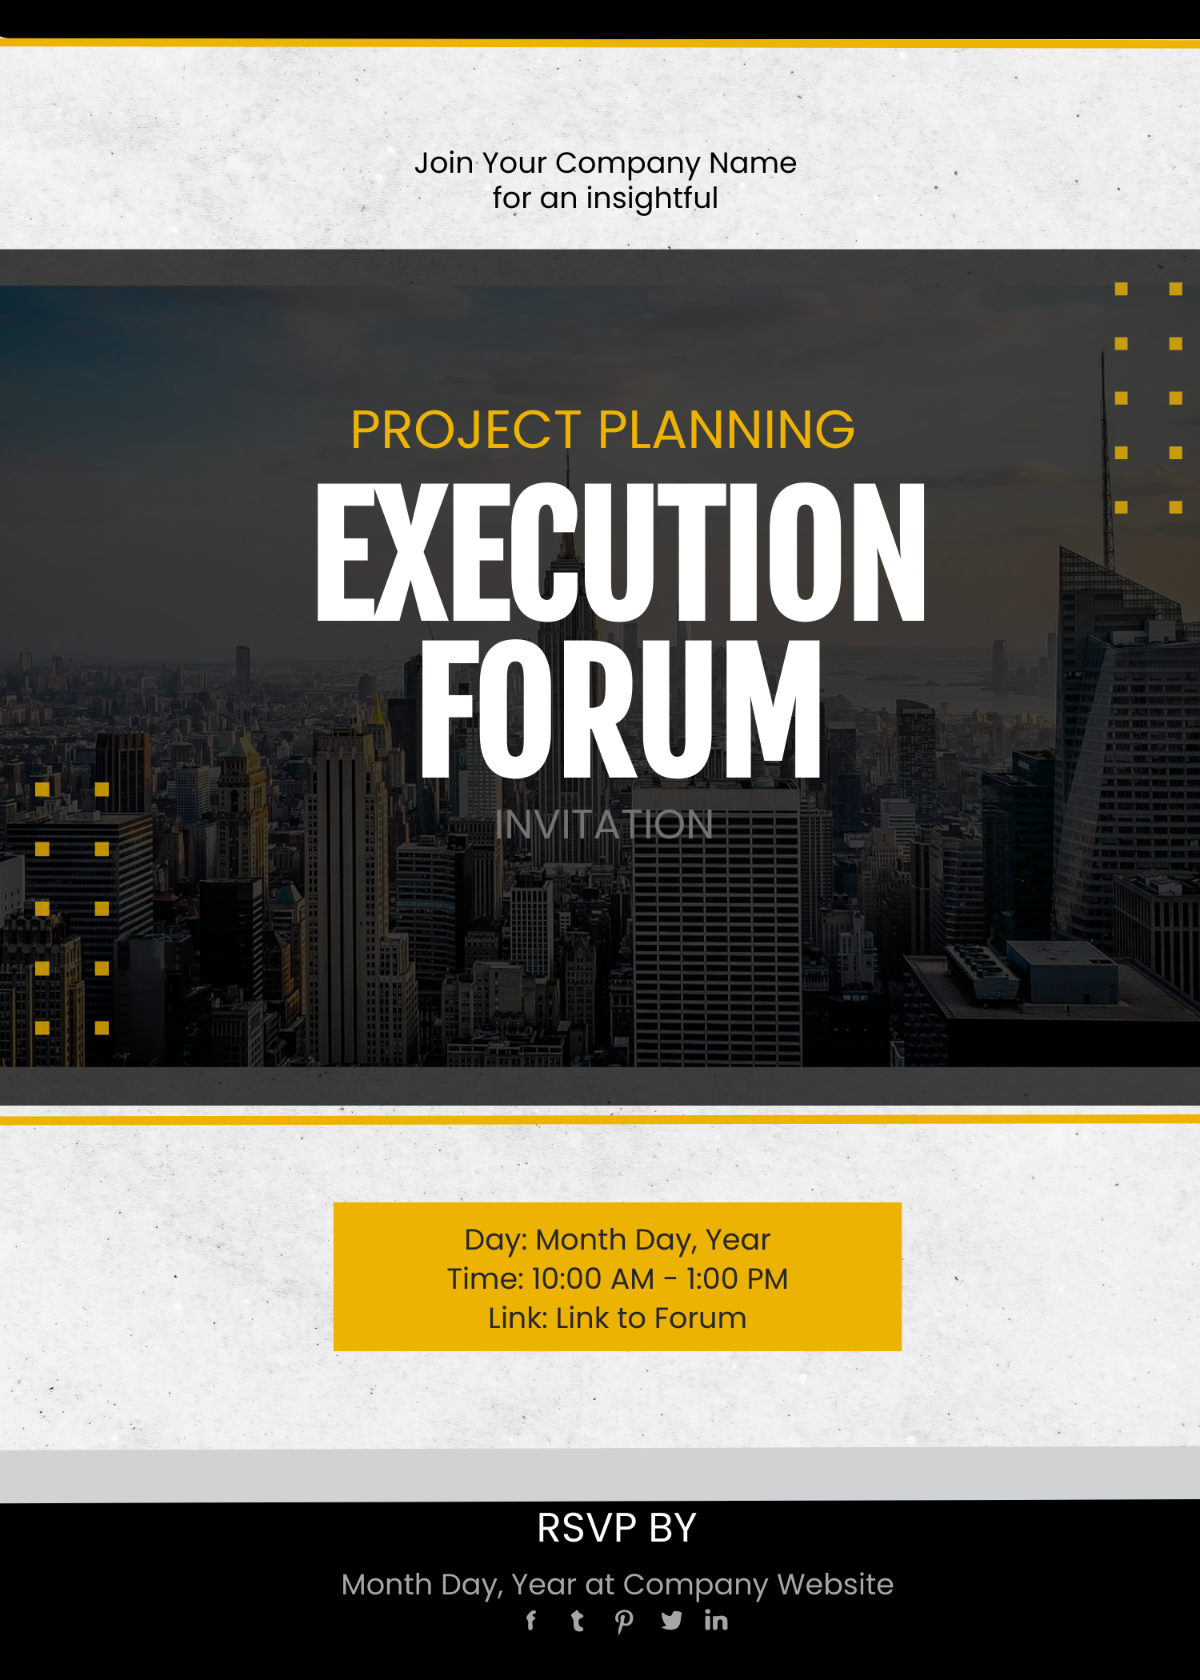 Project Planning and Execution Forum Invitation Card Template